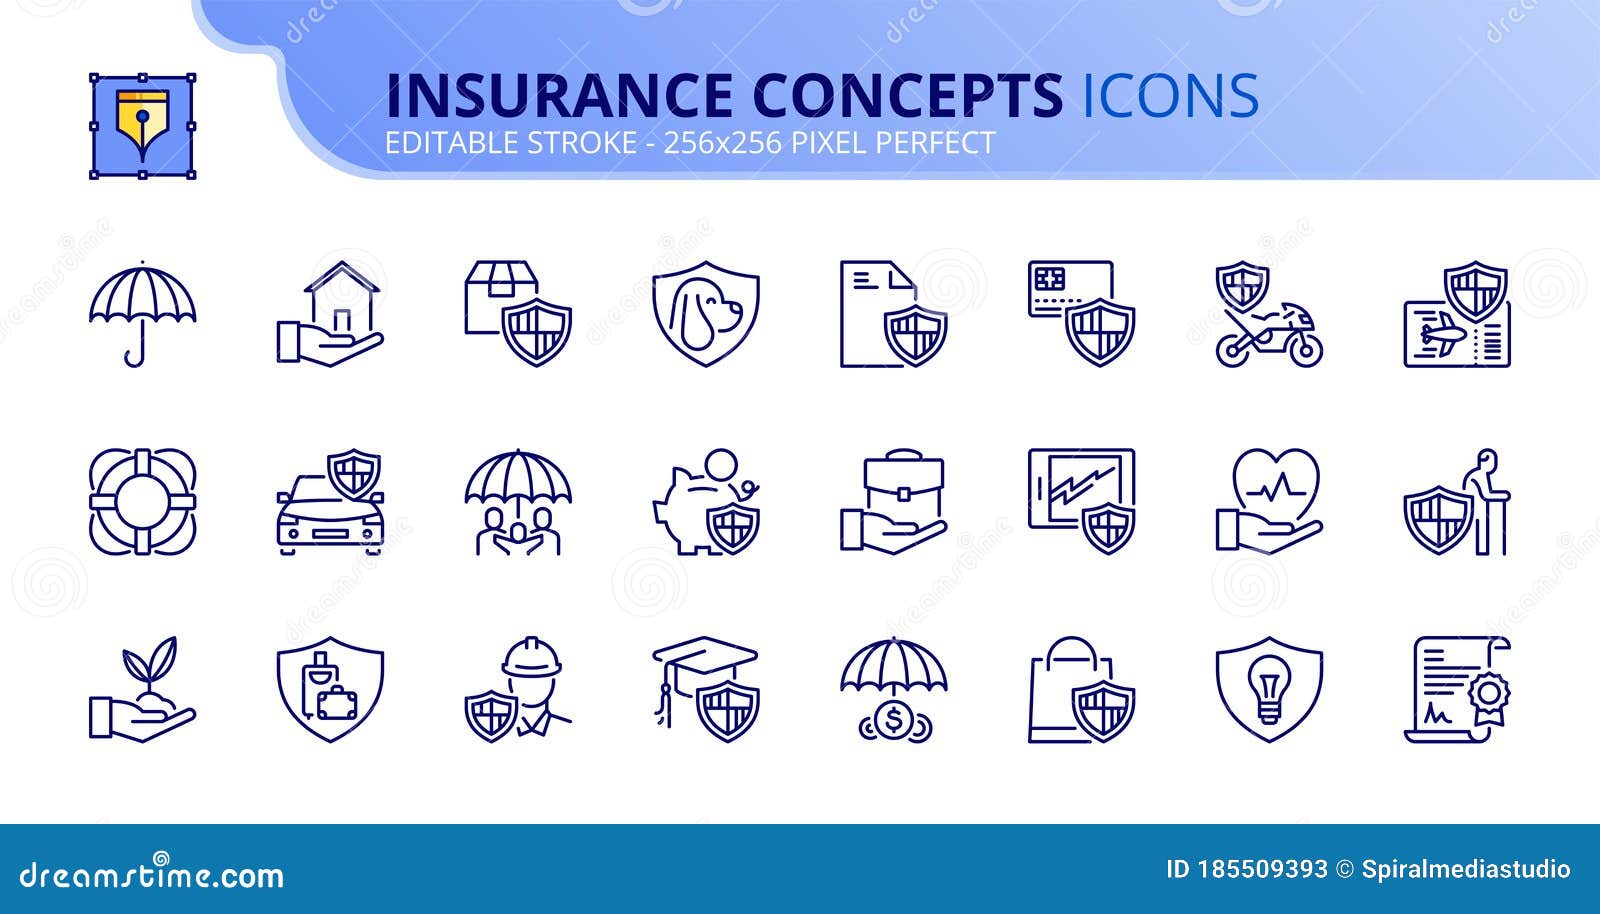 Icons Insurance Stock Illustrations 26 358 Icons Insurance Stock Illustrations Vectors Clipart Dreamstime